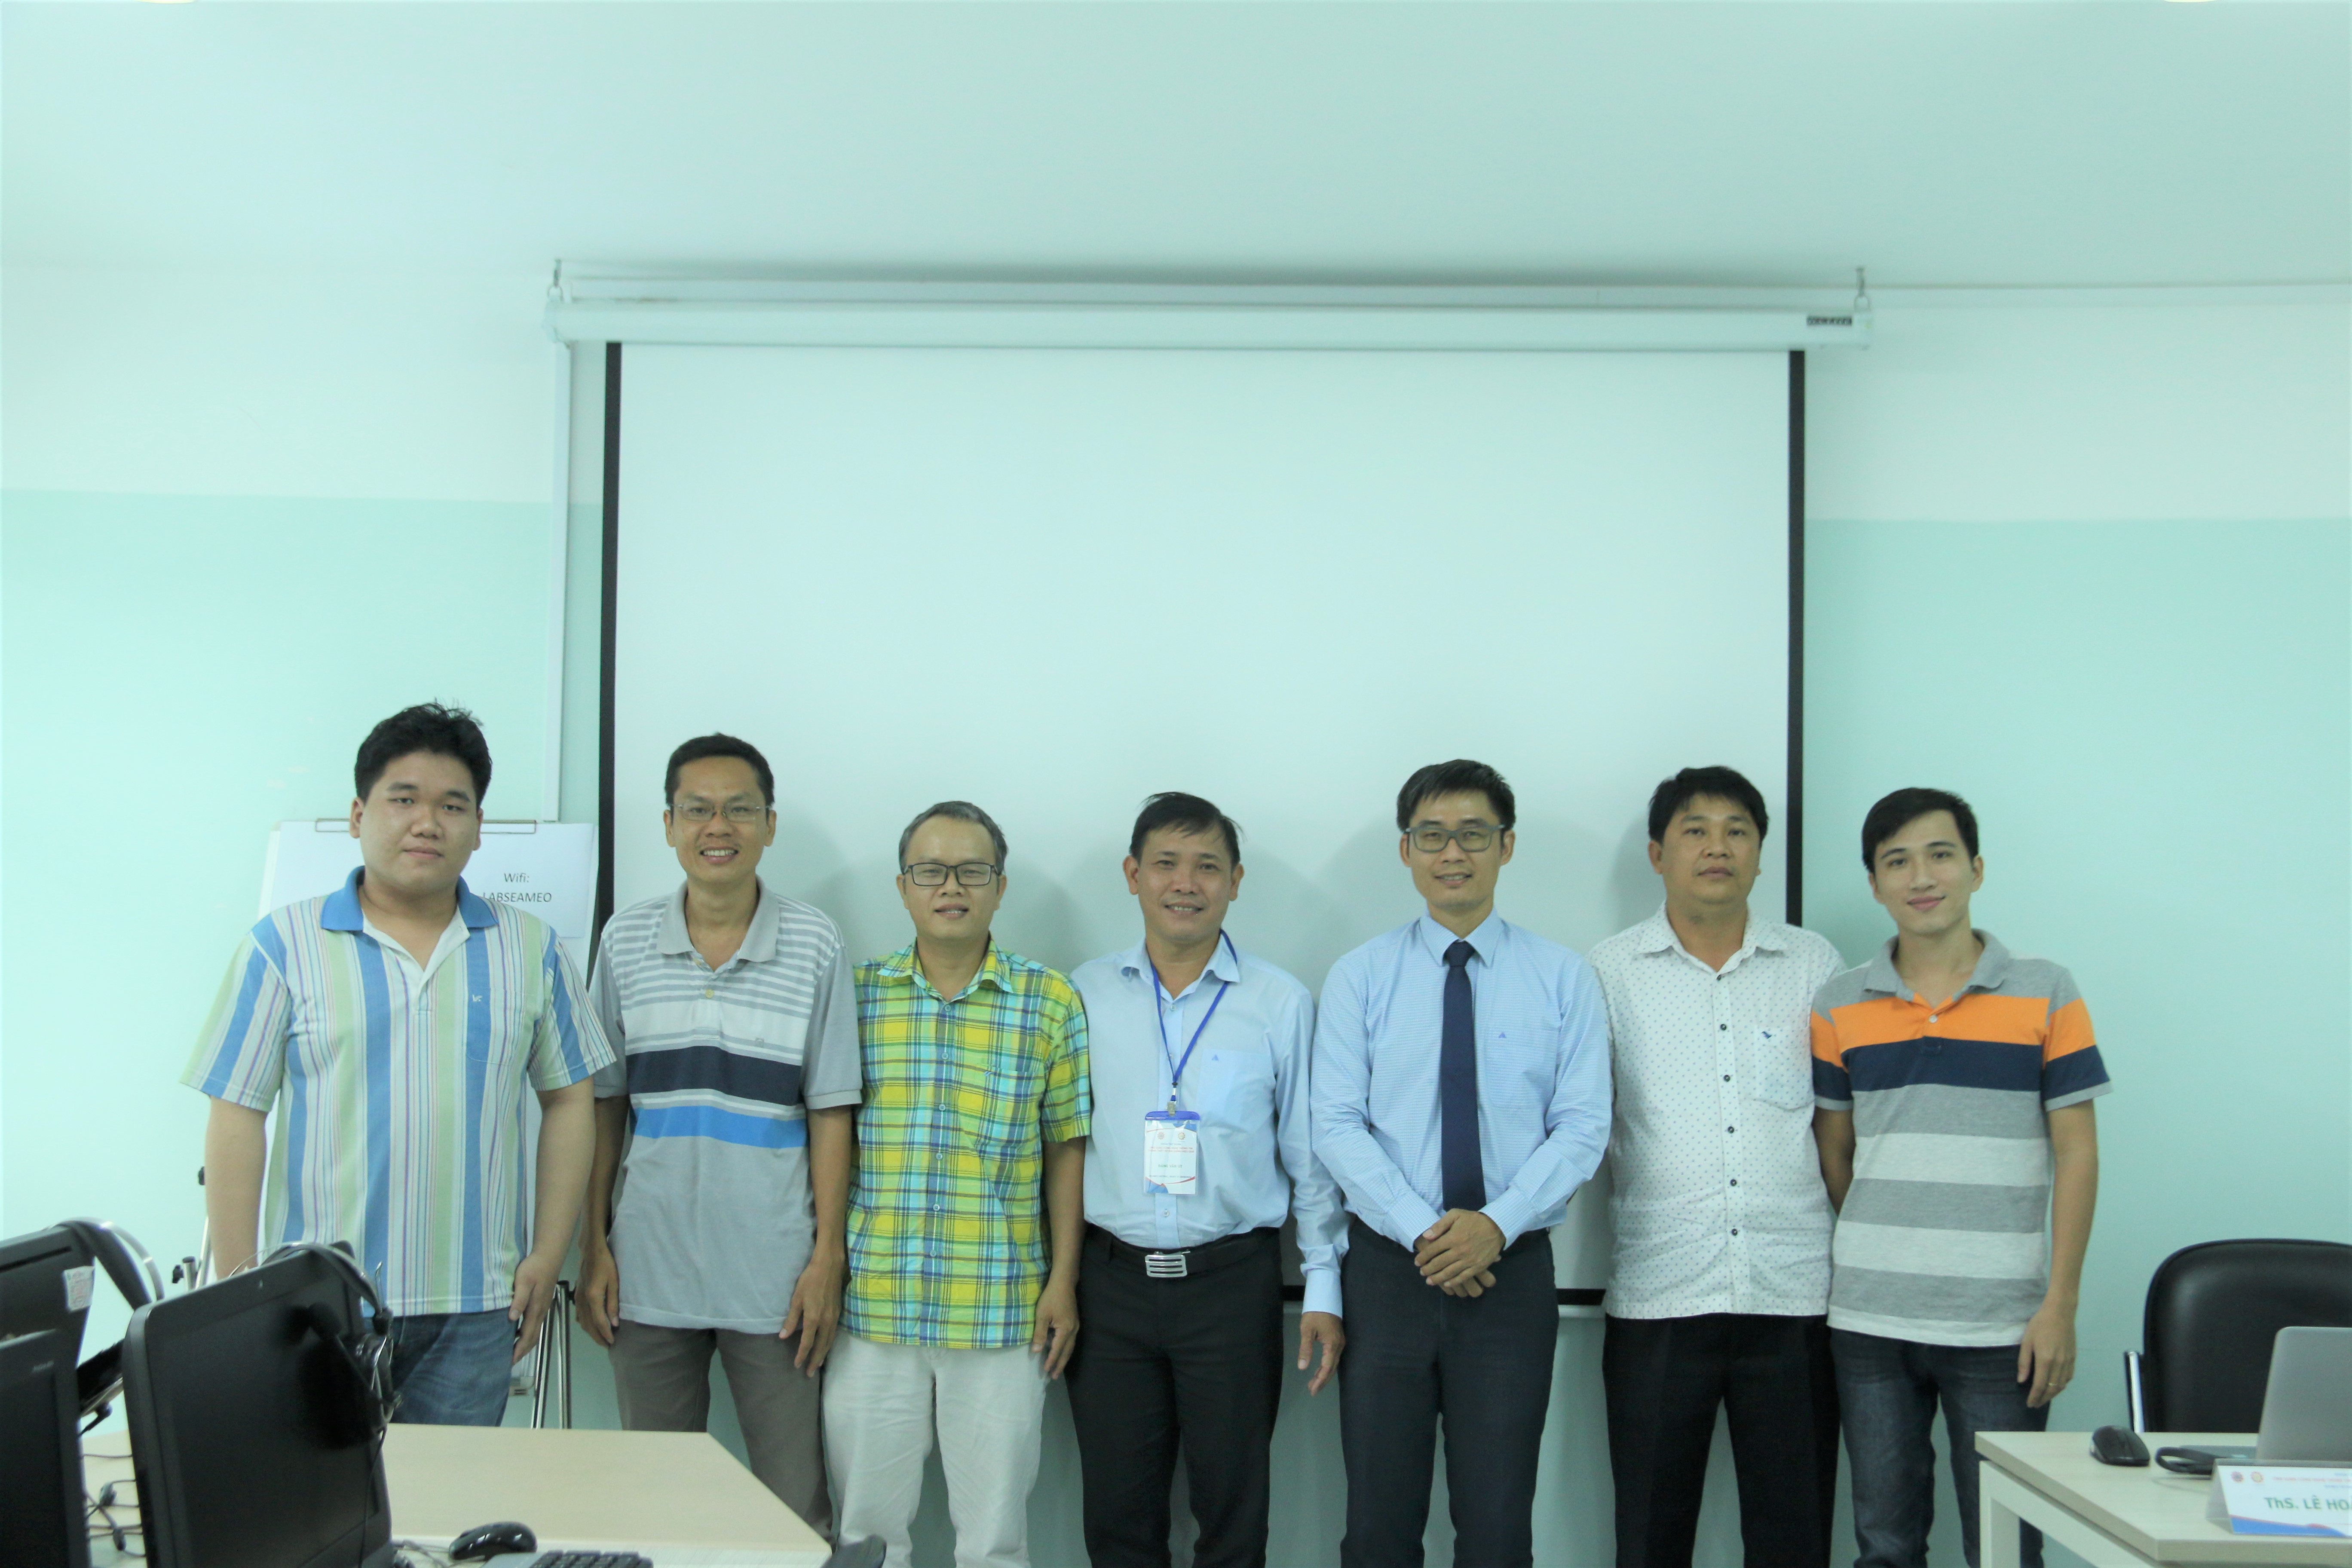 Training course on “Information Communication Technologies (ICT) Applications in Creating Dynamic Lecture Presentations”